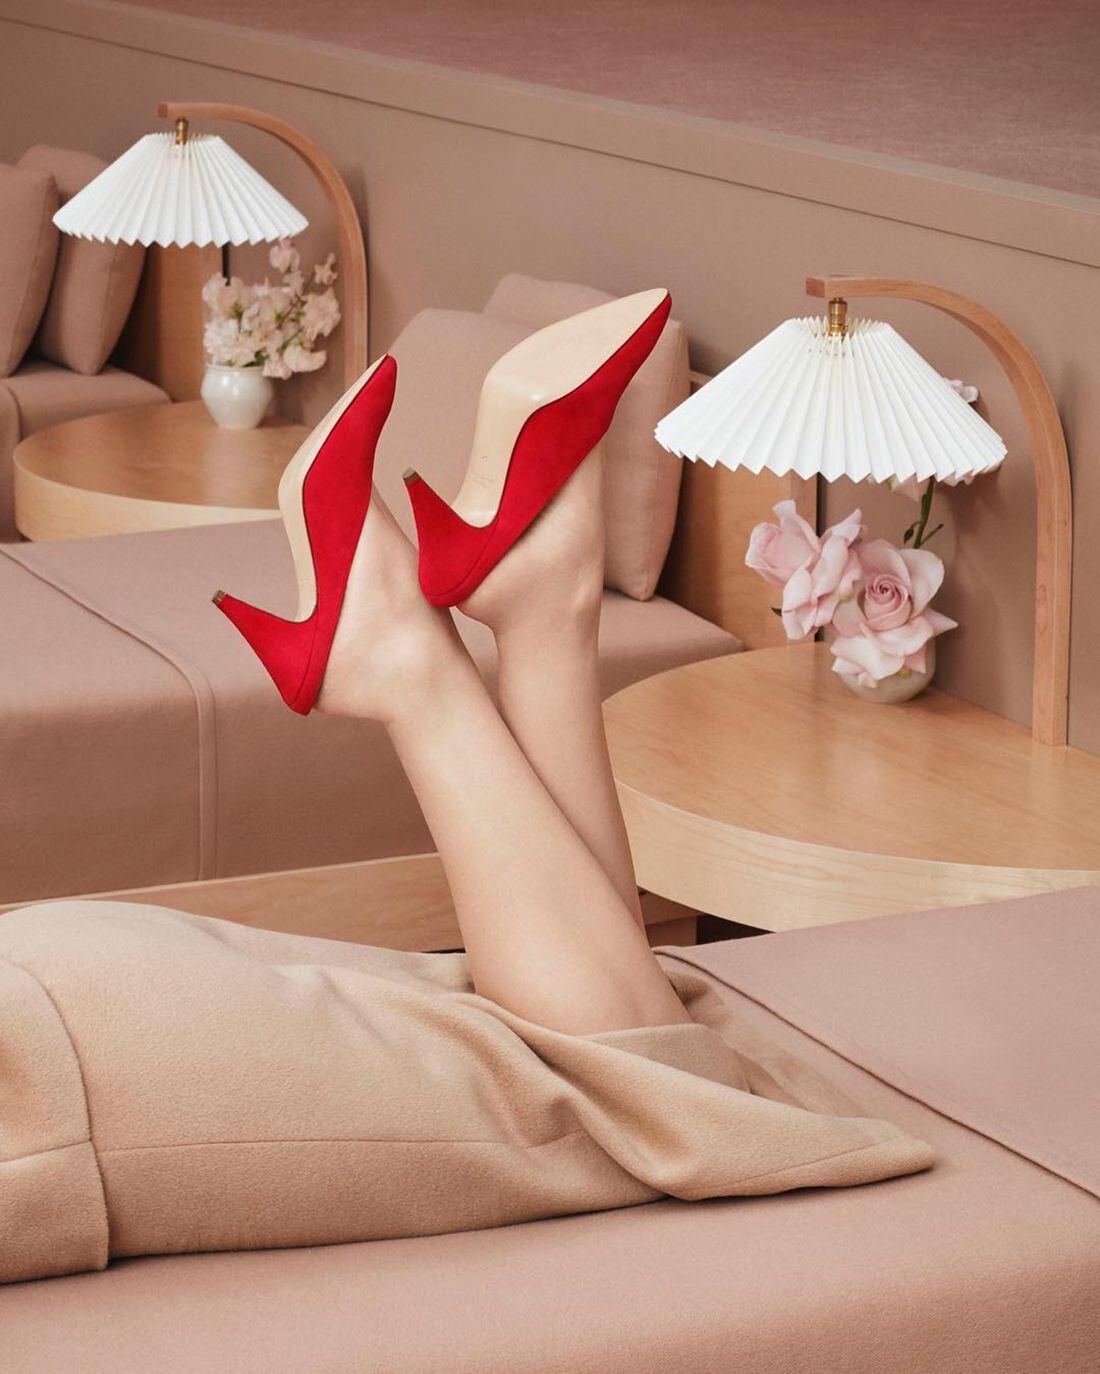 Christian Louboutin: 'Comfortable? It doesn't say passion . . .